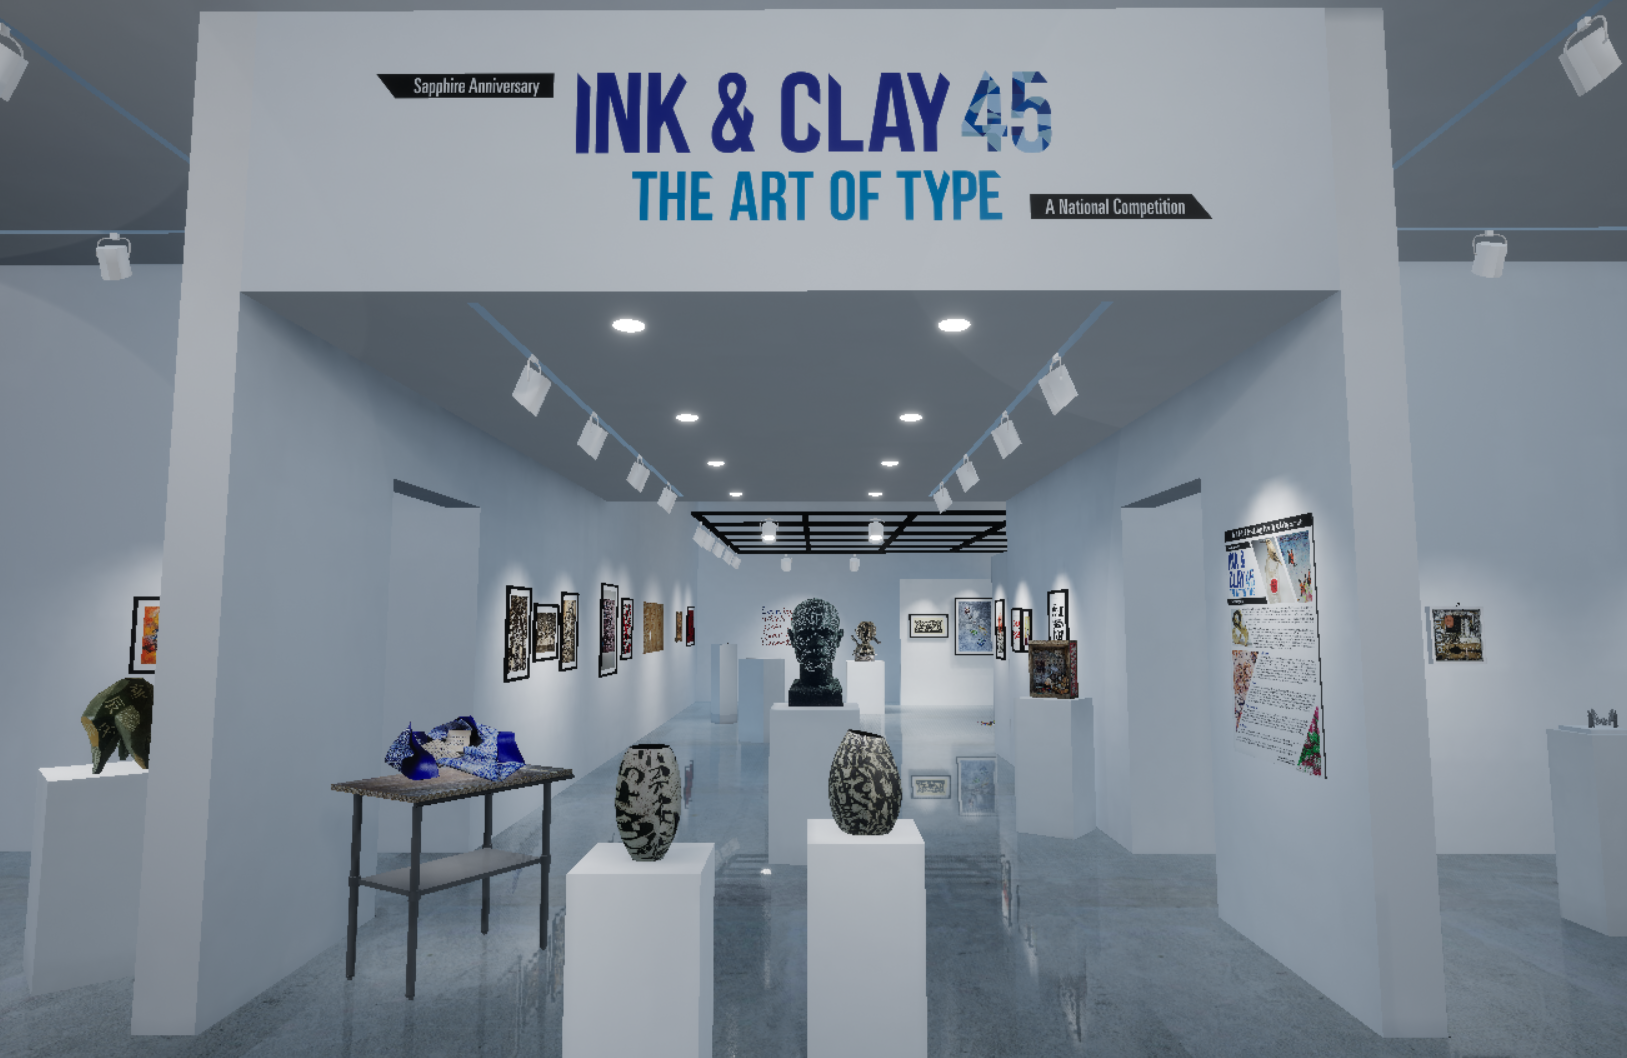 Installation View, Title Wall, "Ink & Clay 45" Virtual Exhibition